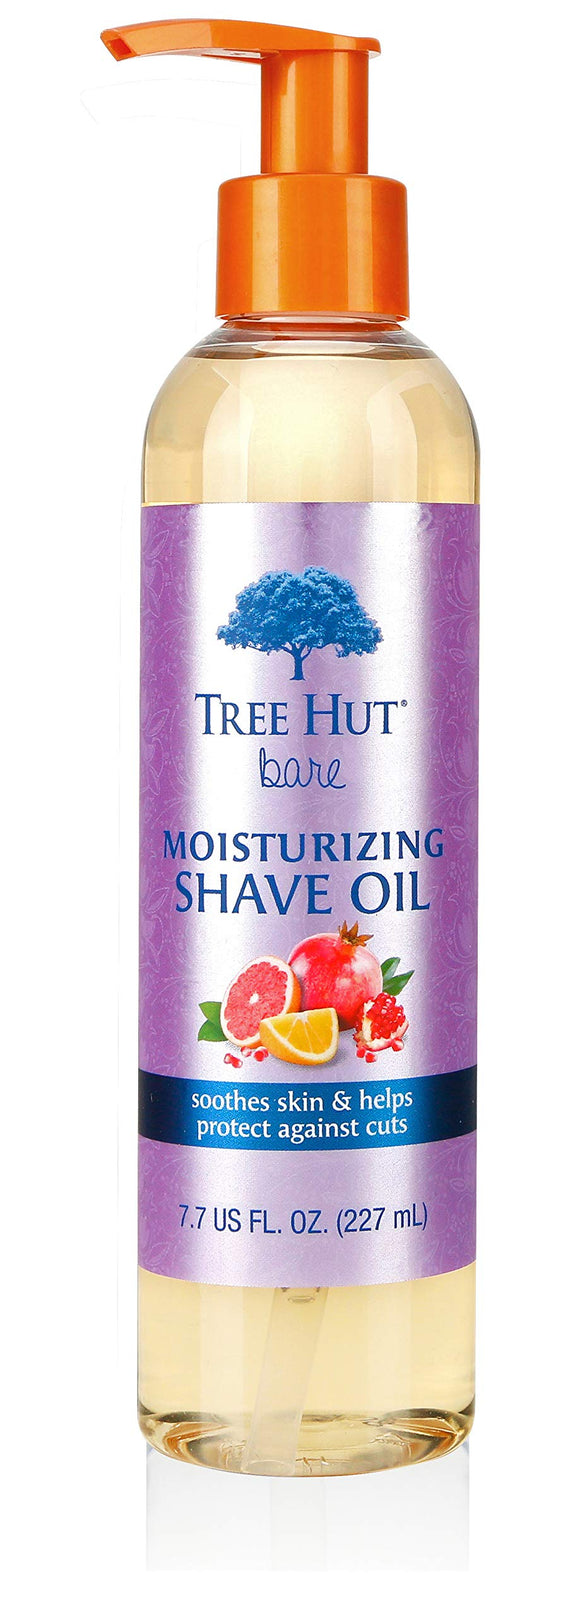 Tree Hut bare Moisturizing Shave Oil with Pomegranate Citrus scent, 7.7oz, Essentials for Soft, Smooth, Bare Skin